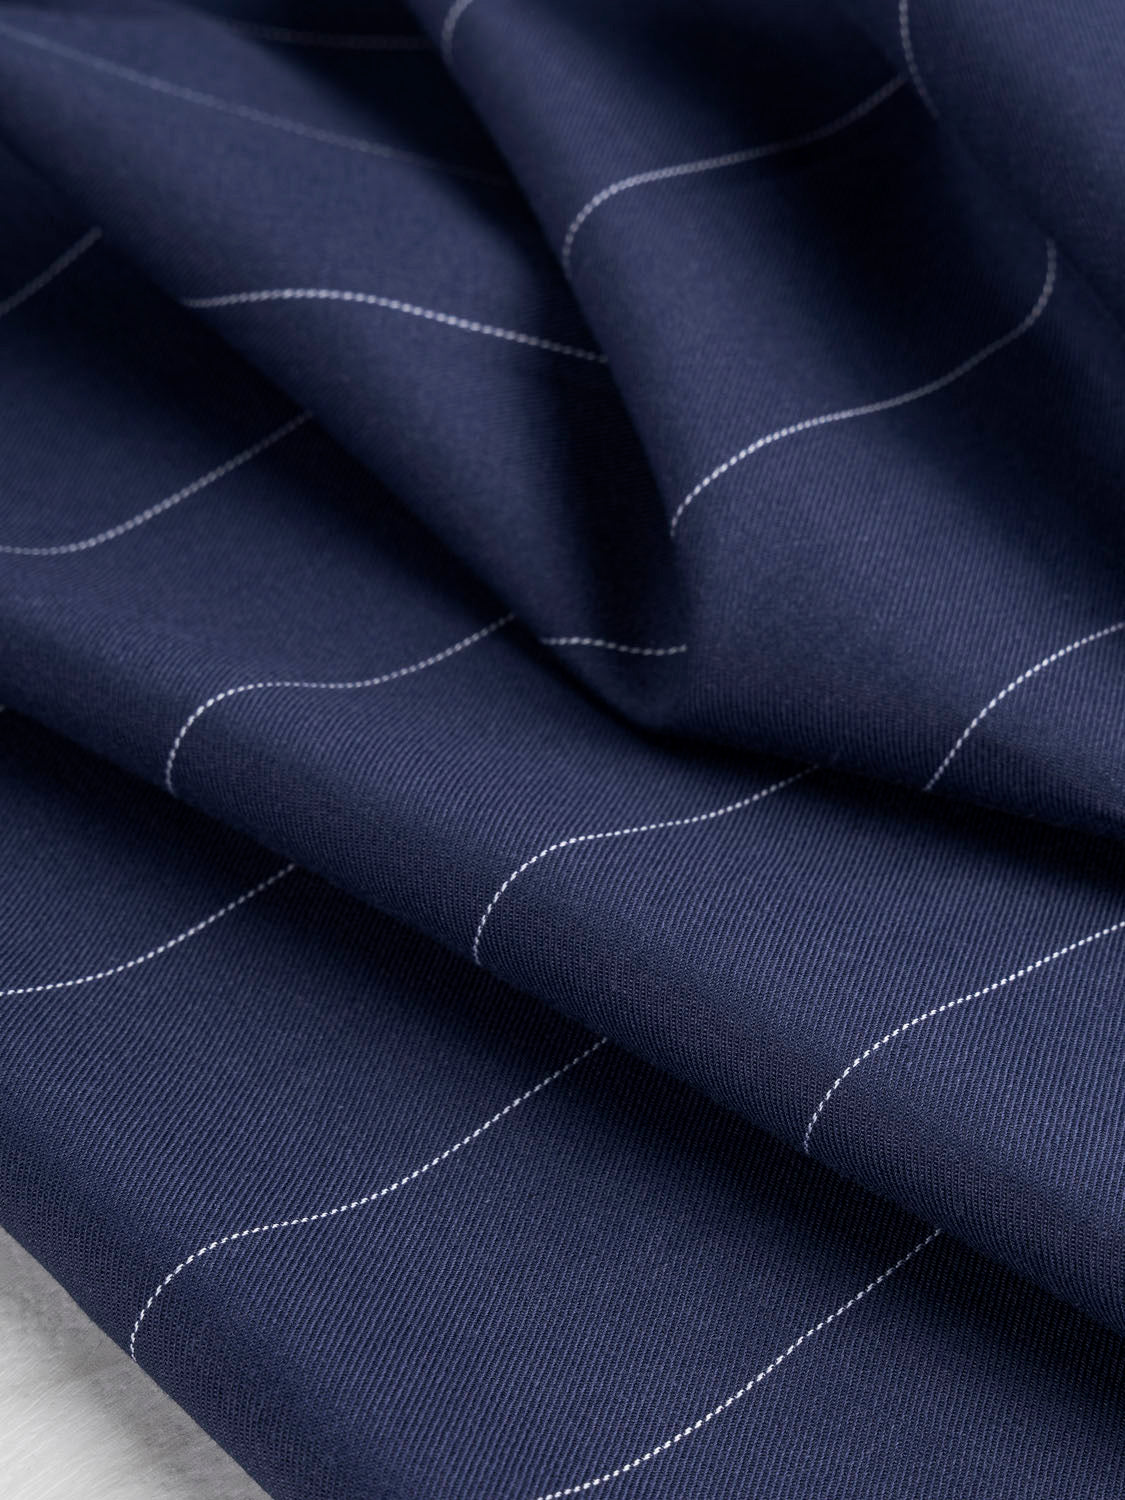 1 Yard Piece of Blue and Navy | Woven Twill Wool Fabric | 12oz | 80/20 |  54 Wide | By the Yard